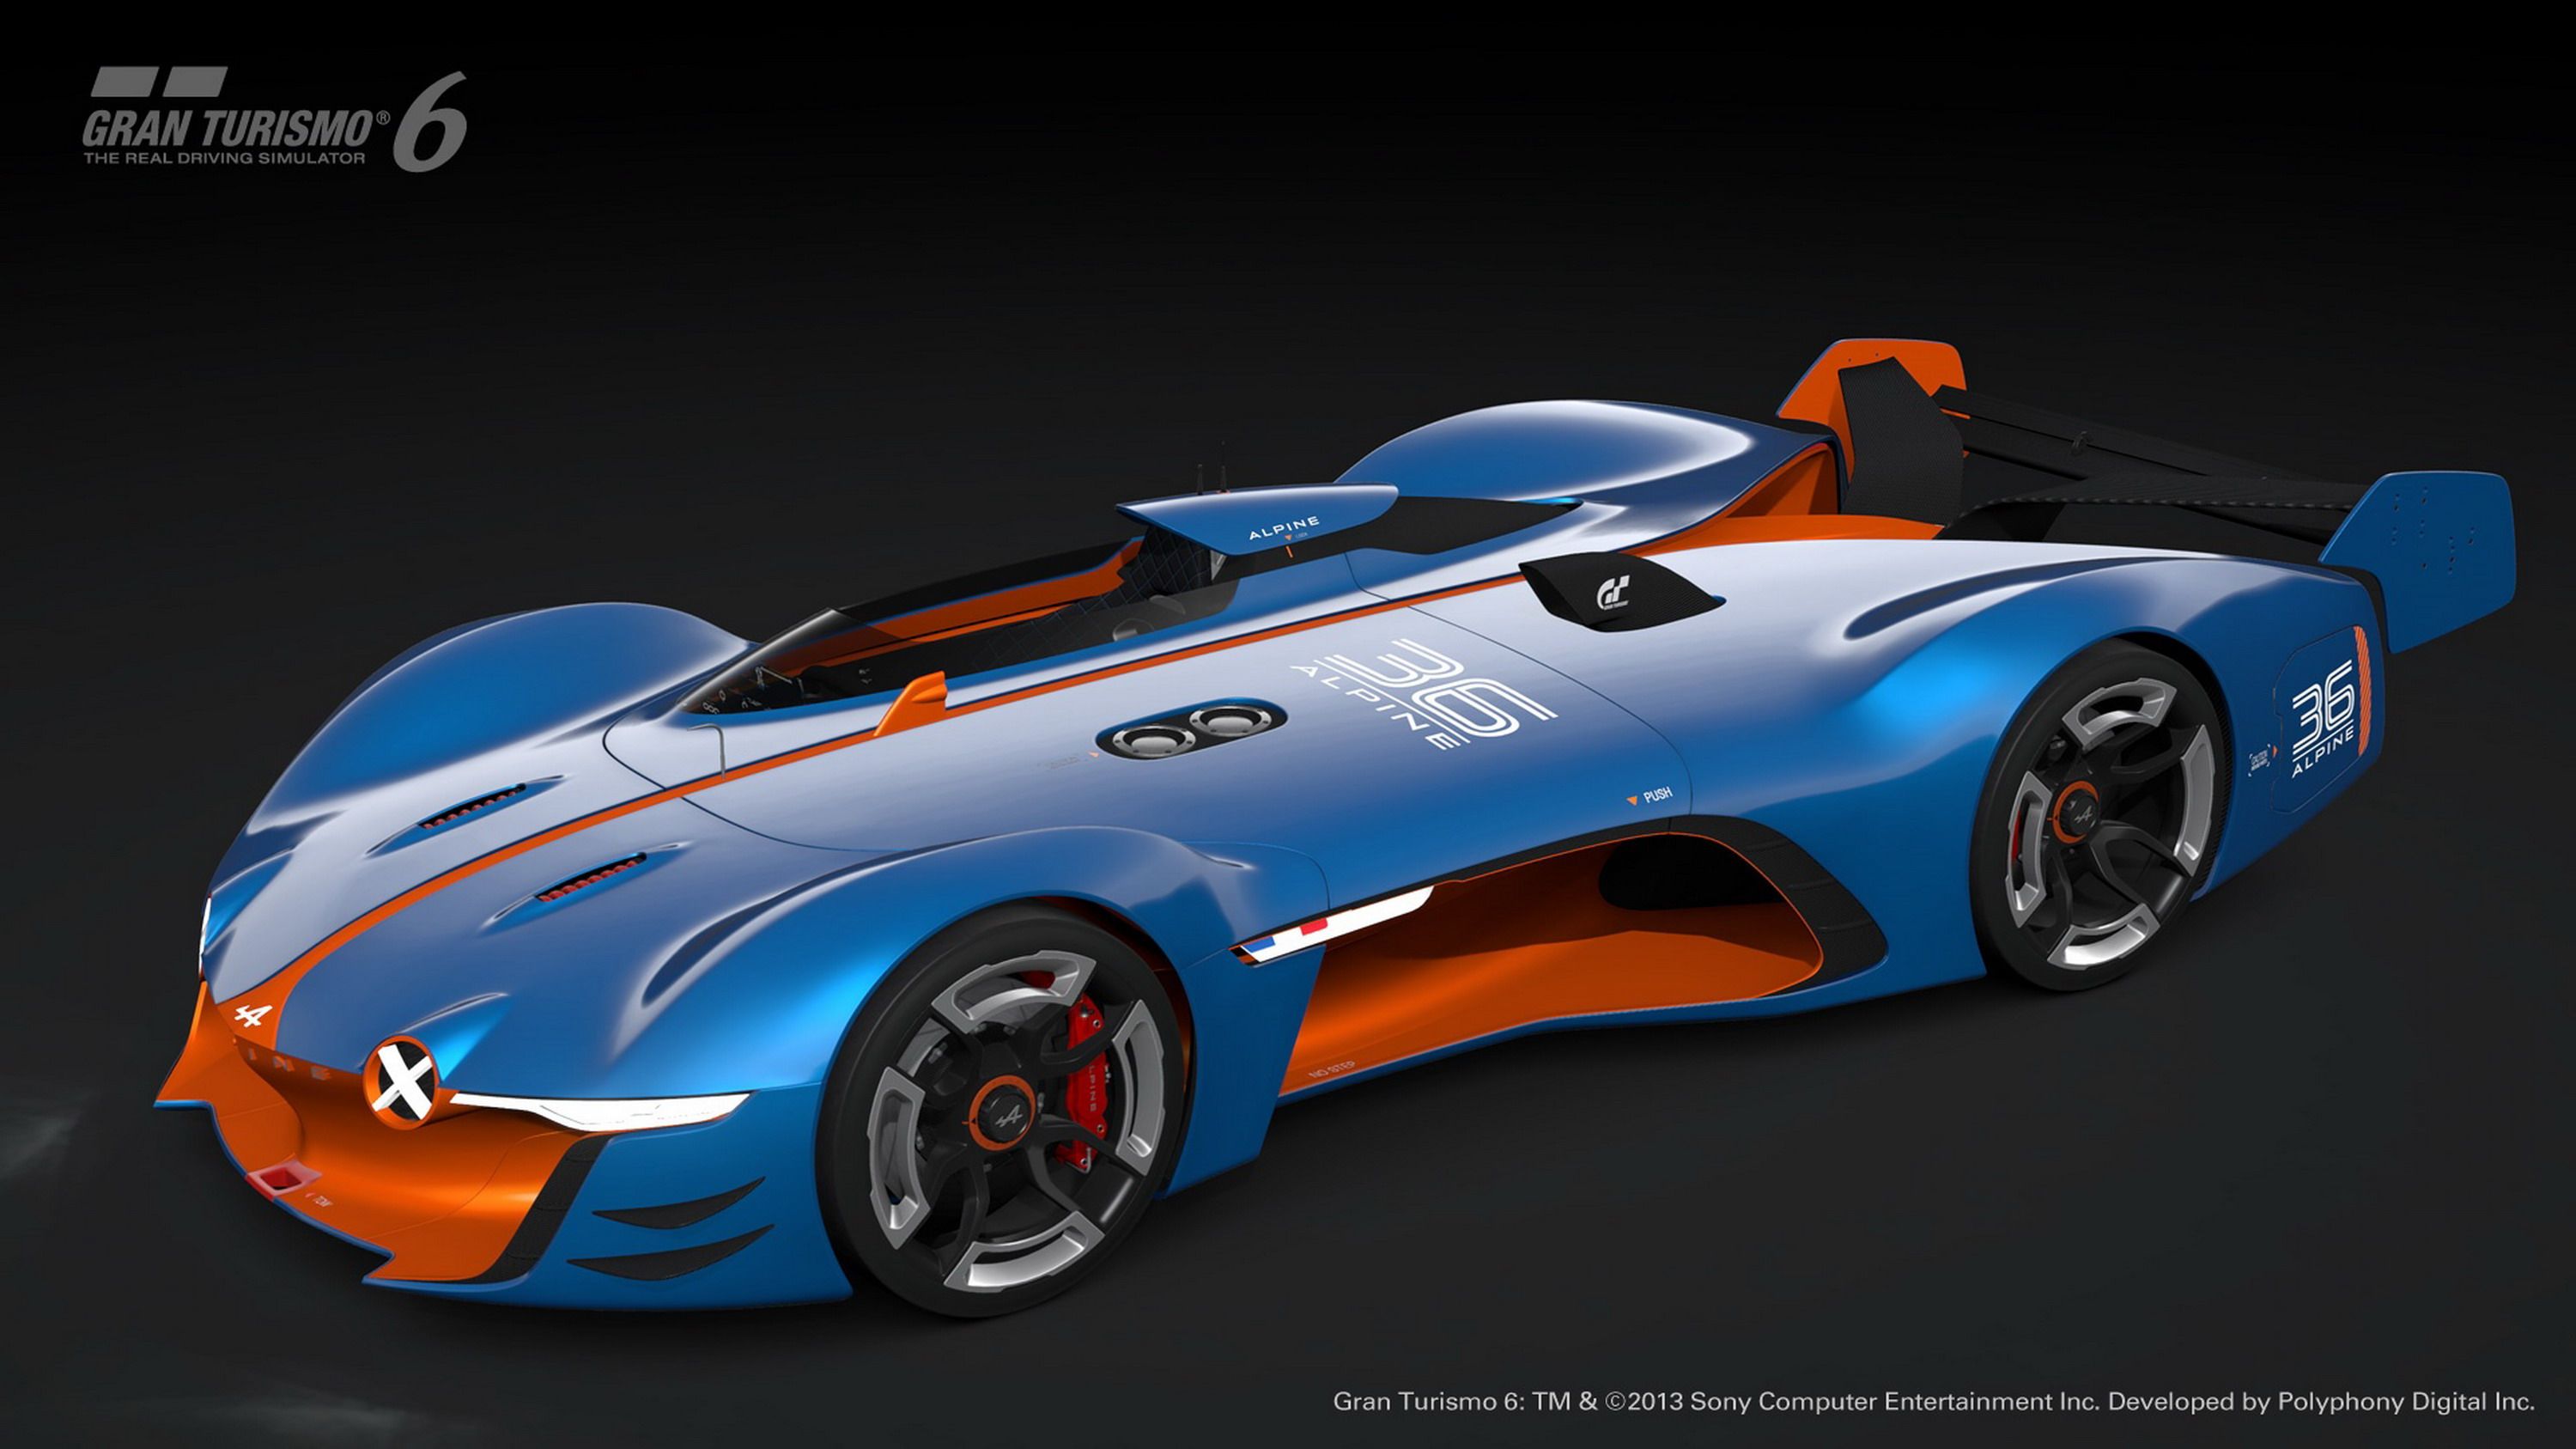  The Alpine sports car may still be a pipedream, but the Vision GT Concept version carrying the famed name is freaking awesome!